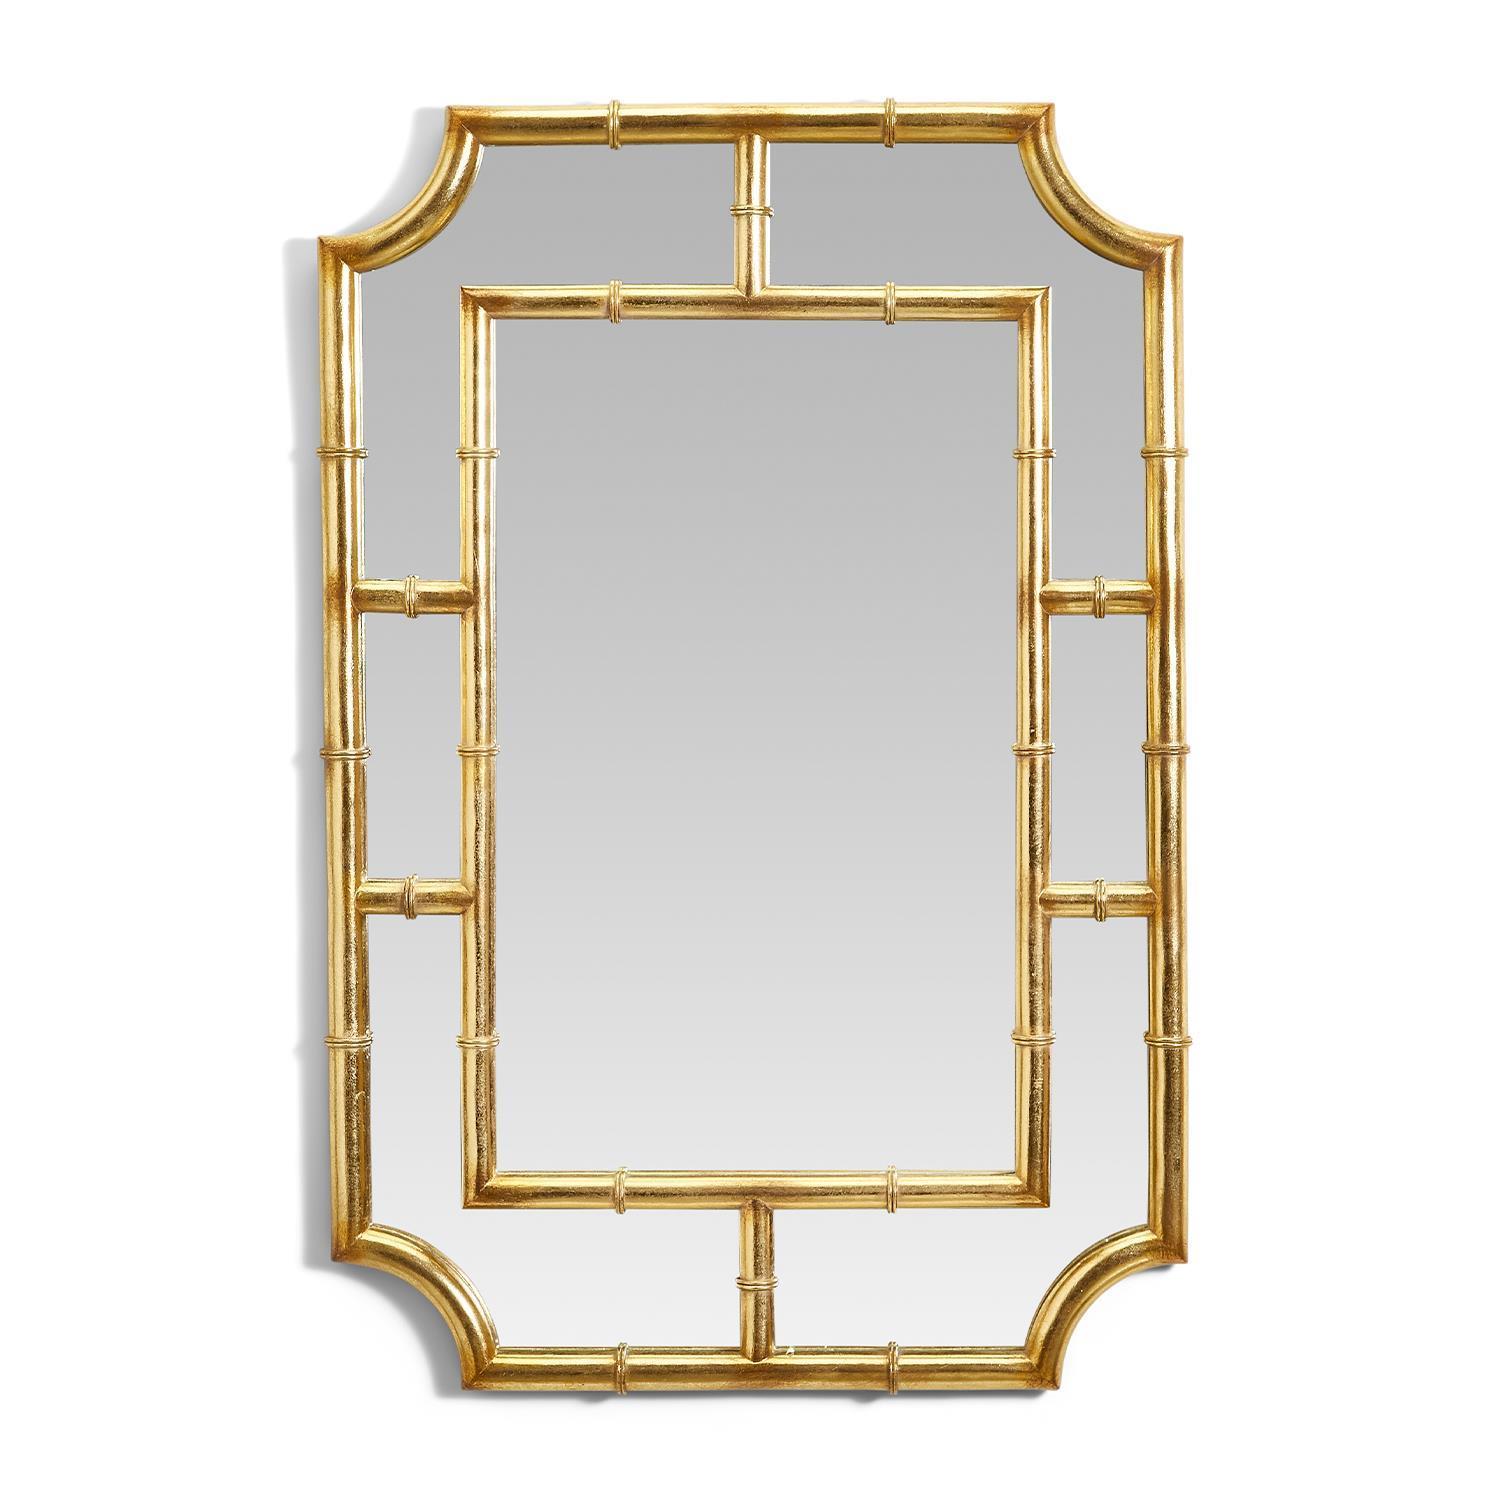 Twos Company Home Grand Ambitions Golden Bamboo Wall Mirror